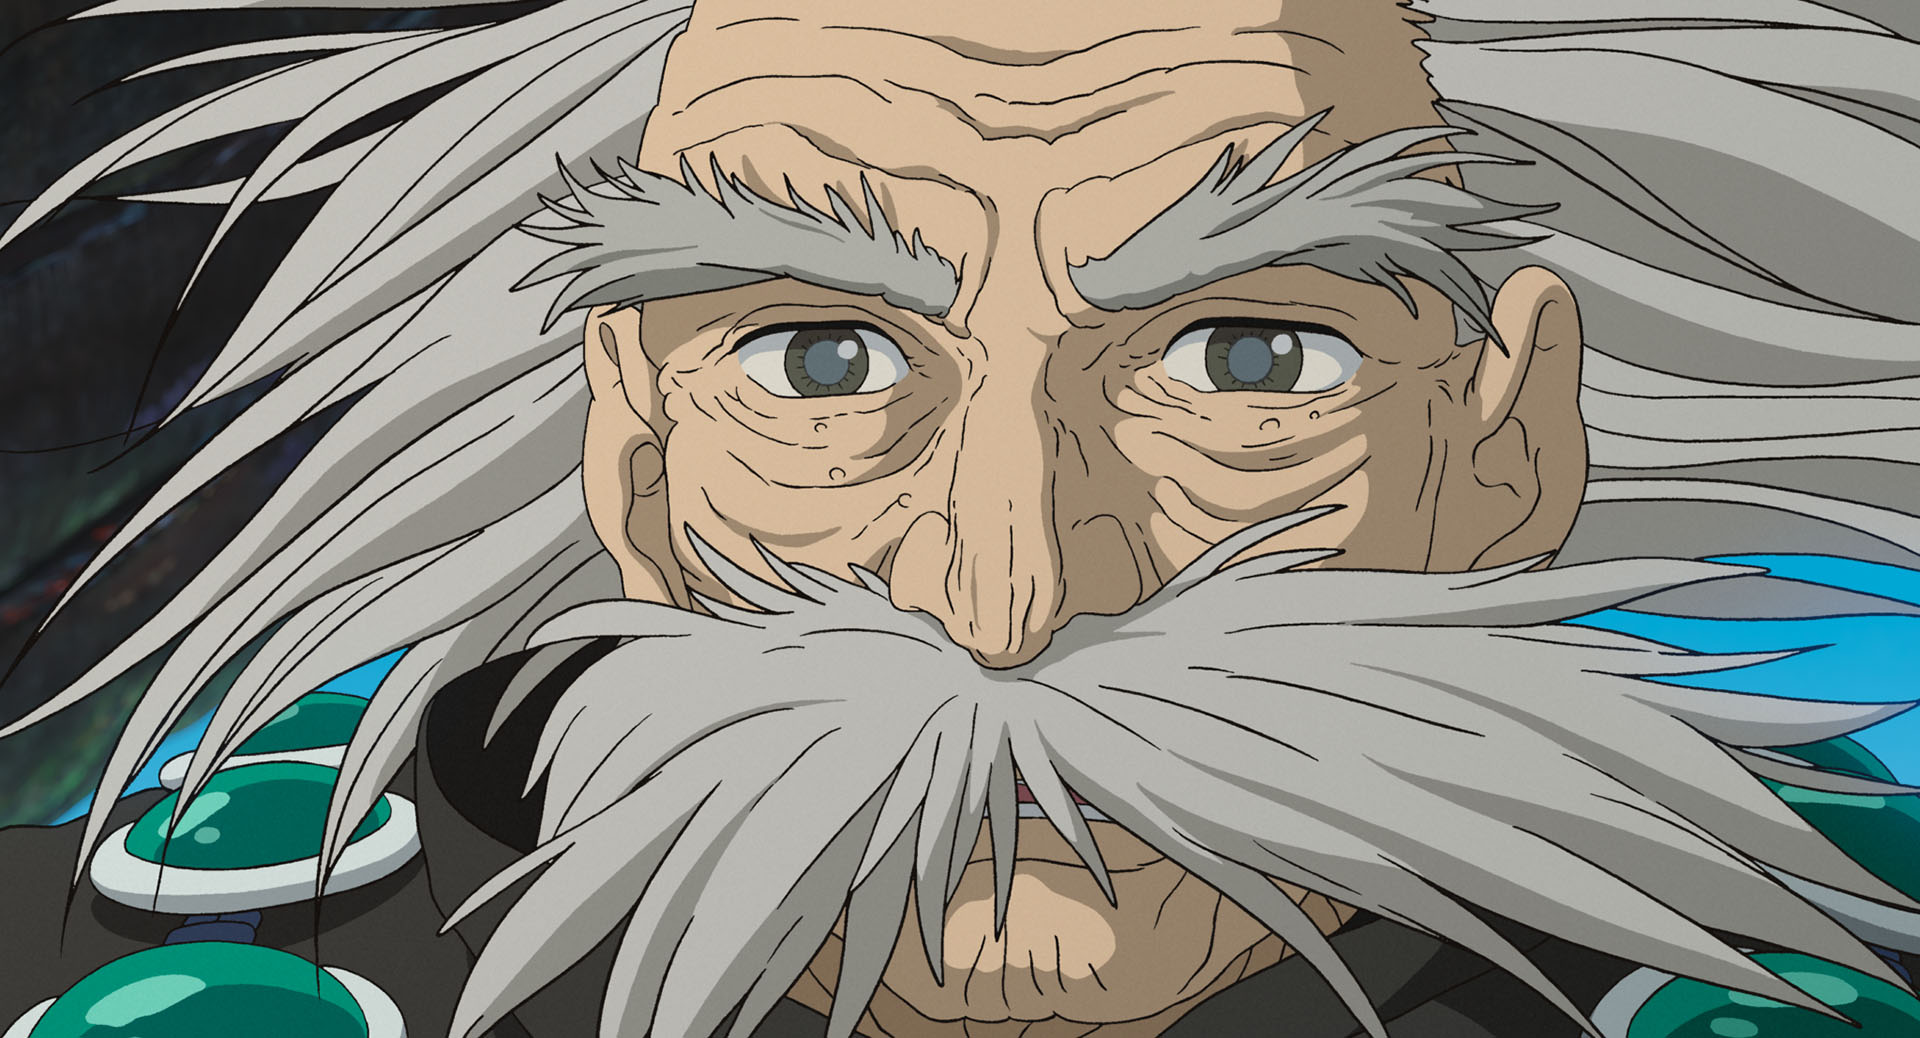 Hayao Miyazaki has ideas for next project after 'The Boy and the Heron